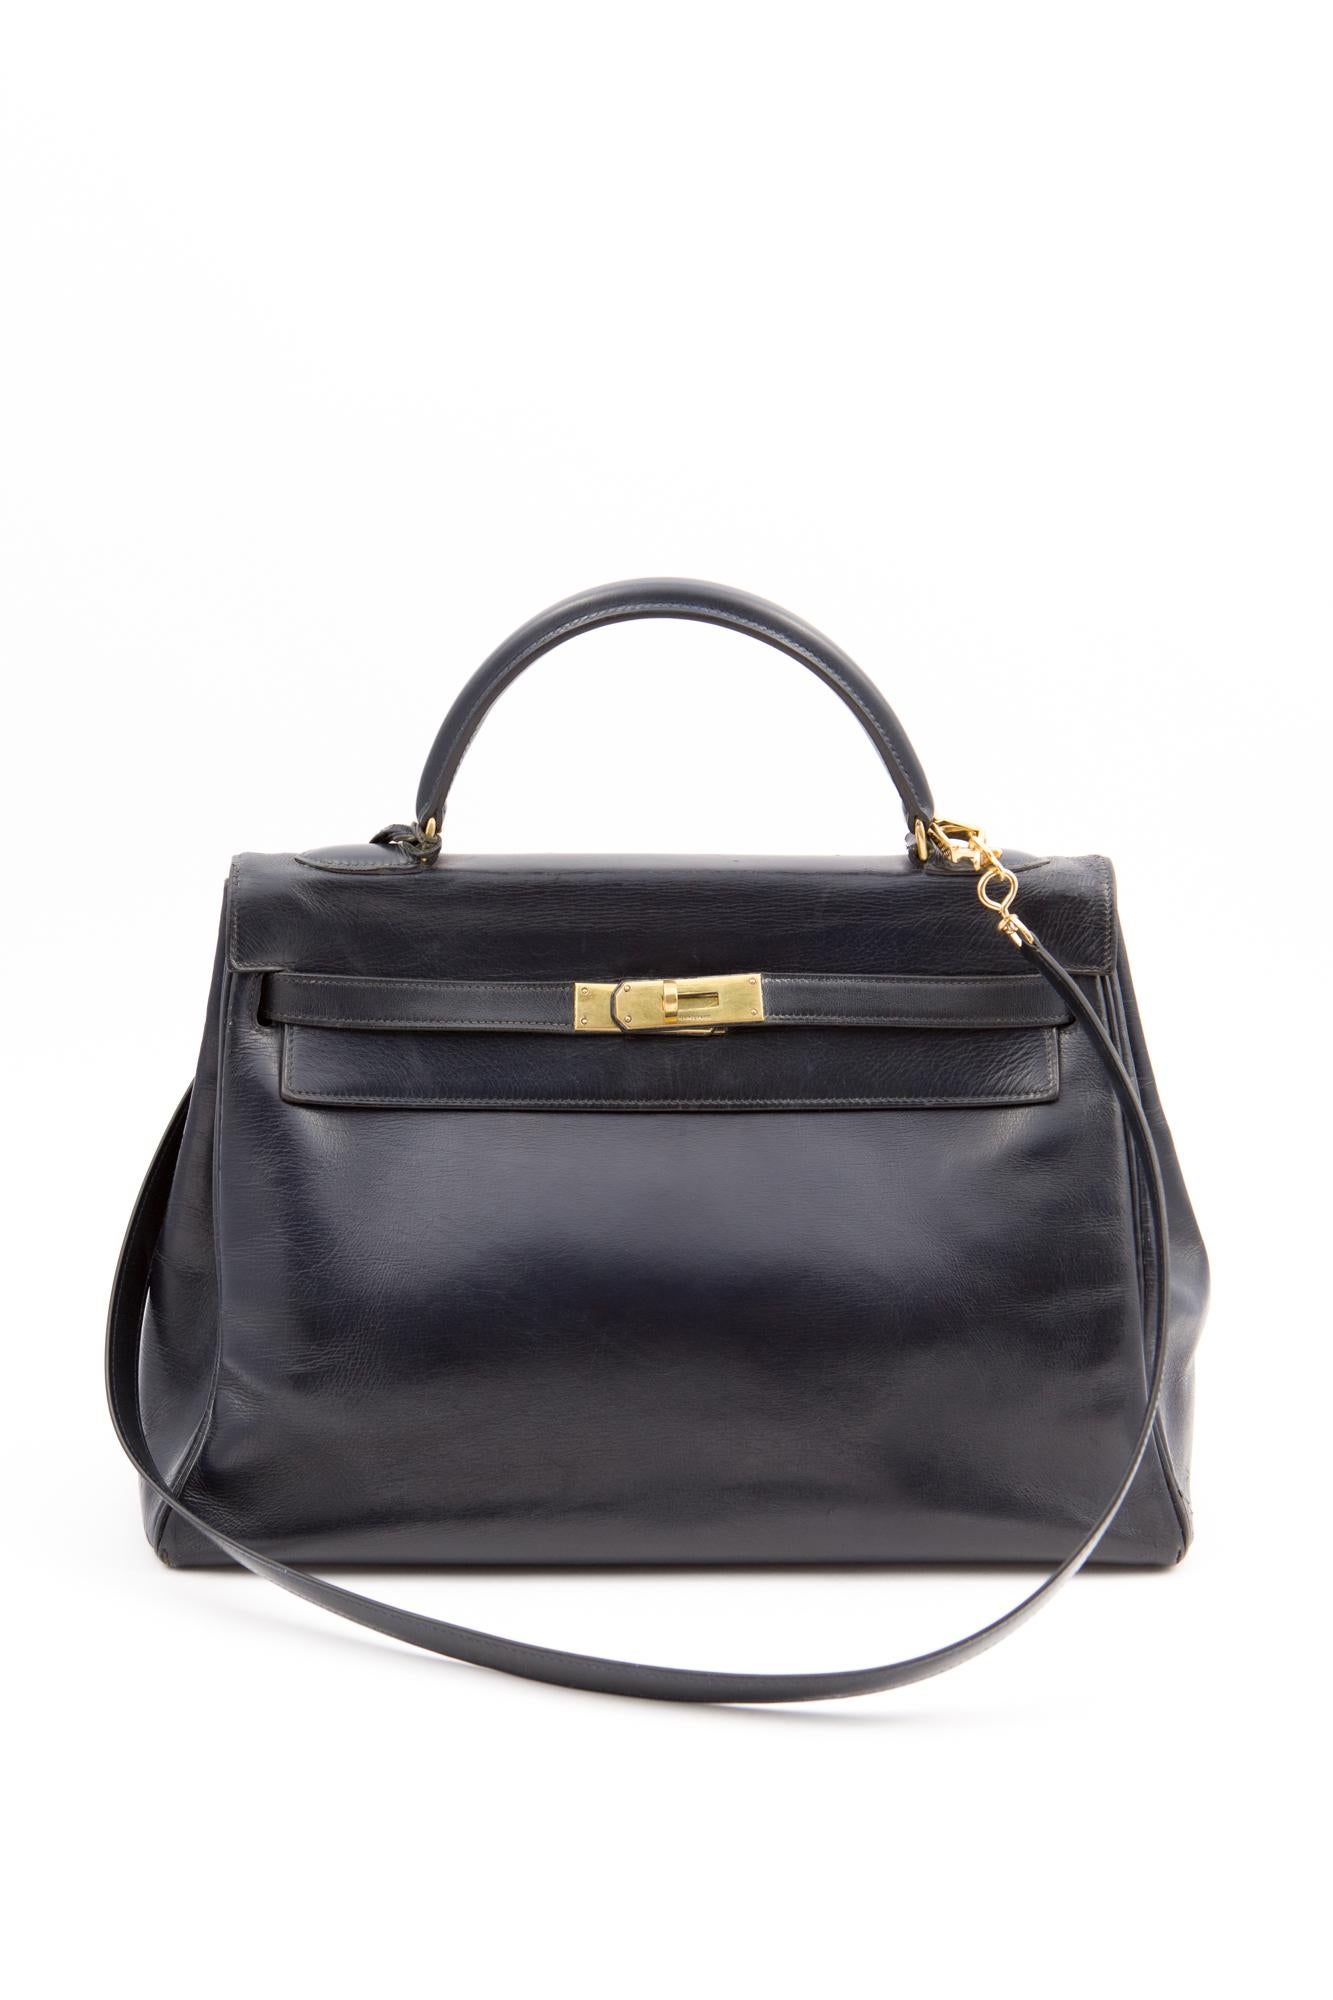 1960-1970s Hermès dark navy box calf leather Kelly tote bag 32cm featuring foldover top with twist-lock closure, a top handle, a trapeze body, plated-gold hardware, an internal slip pocket, a clochette, and a detachable box calf shoulder strap